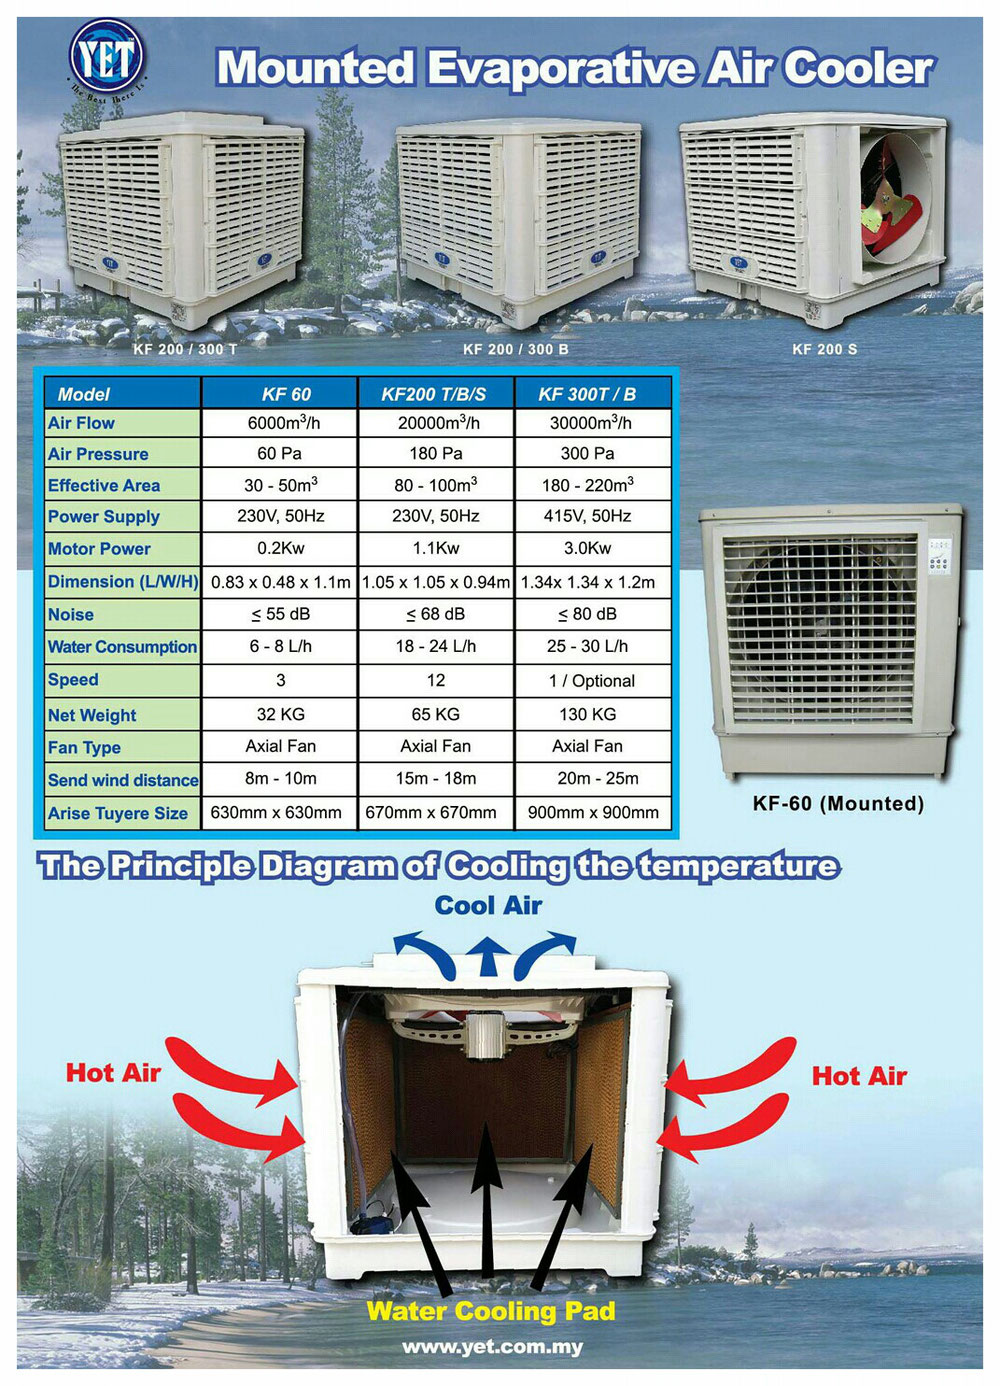 Mounted Evaporative Air Cooler